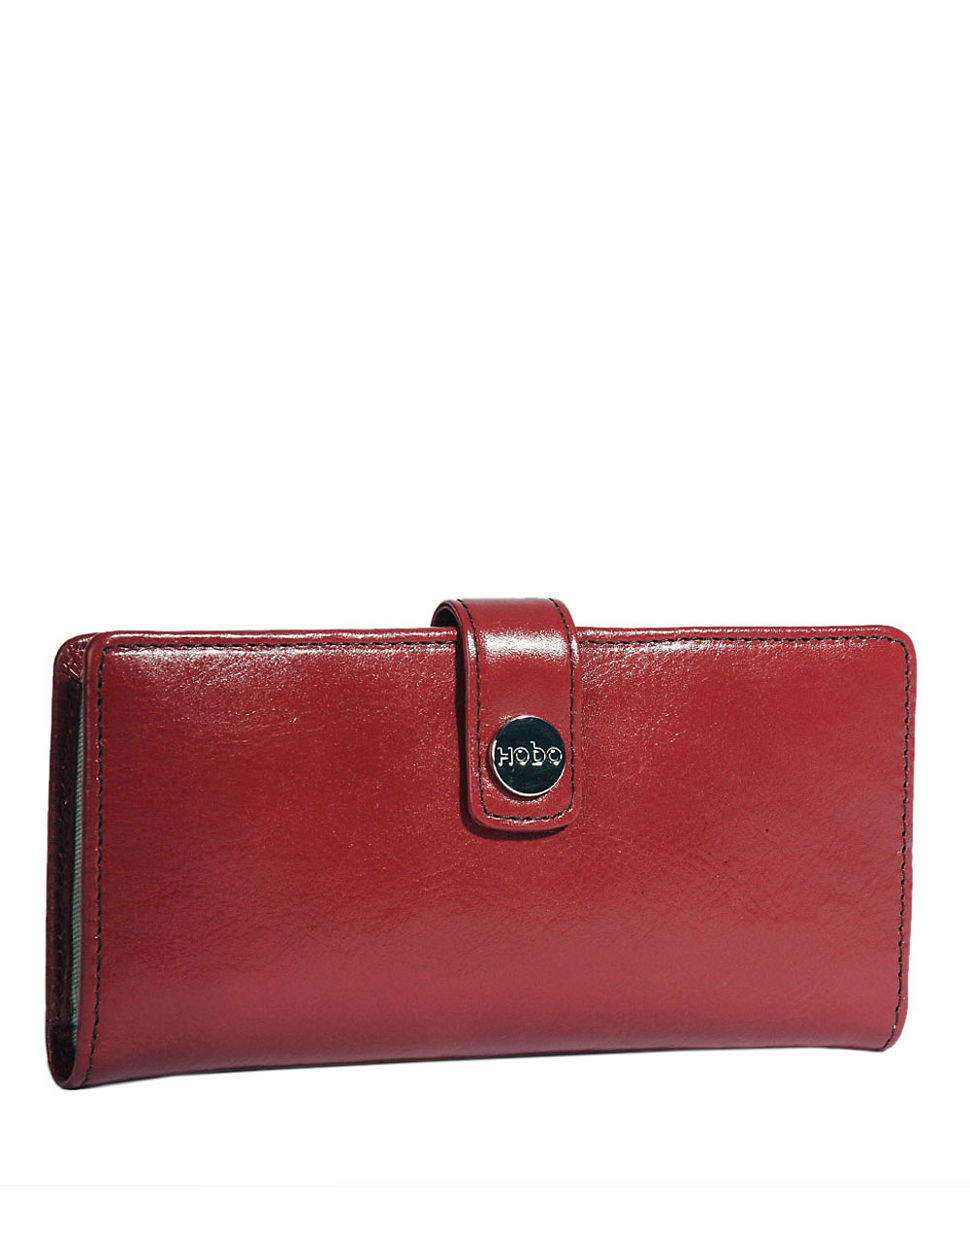 Lyst - Hobo Venice Leather Iris Snap Clutch Wallet in Red